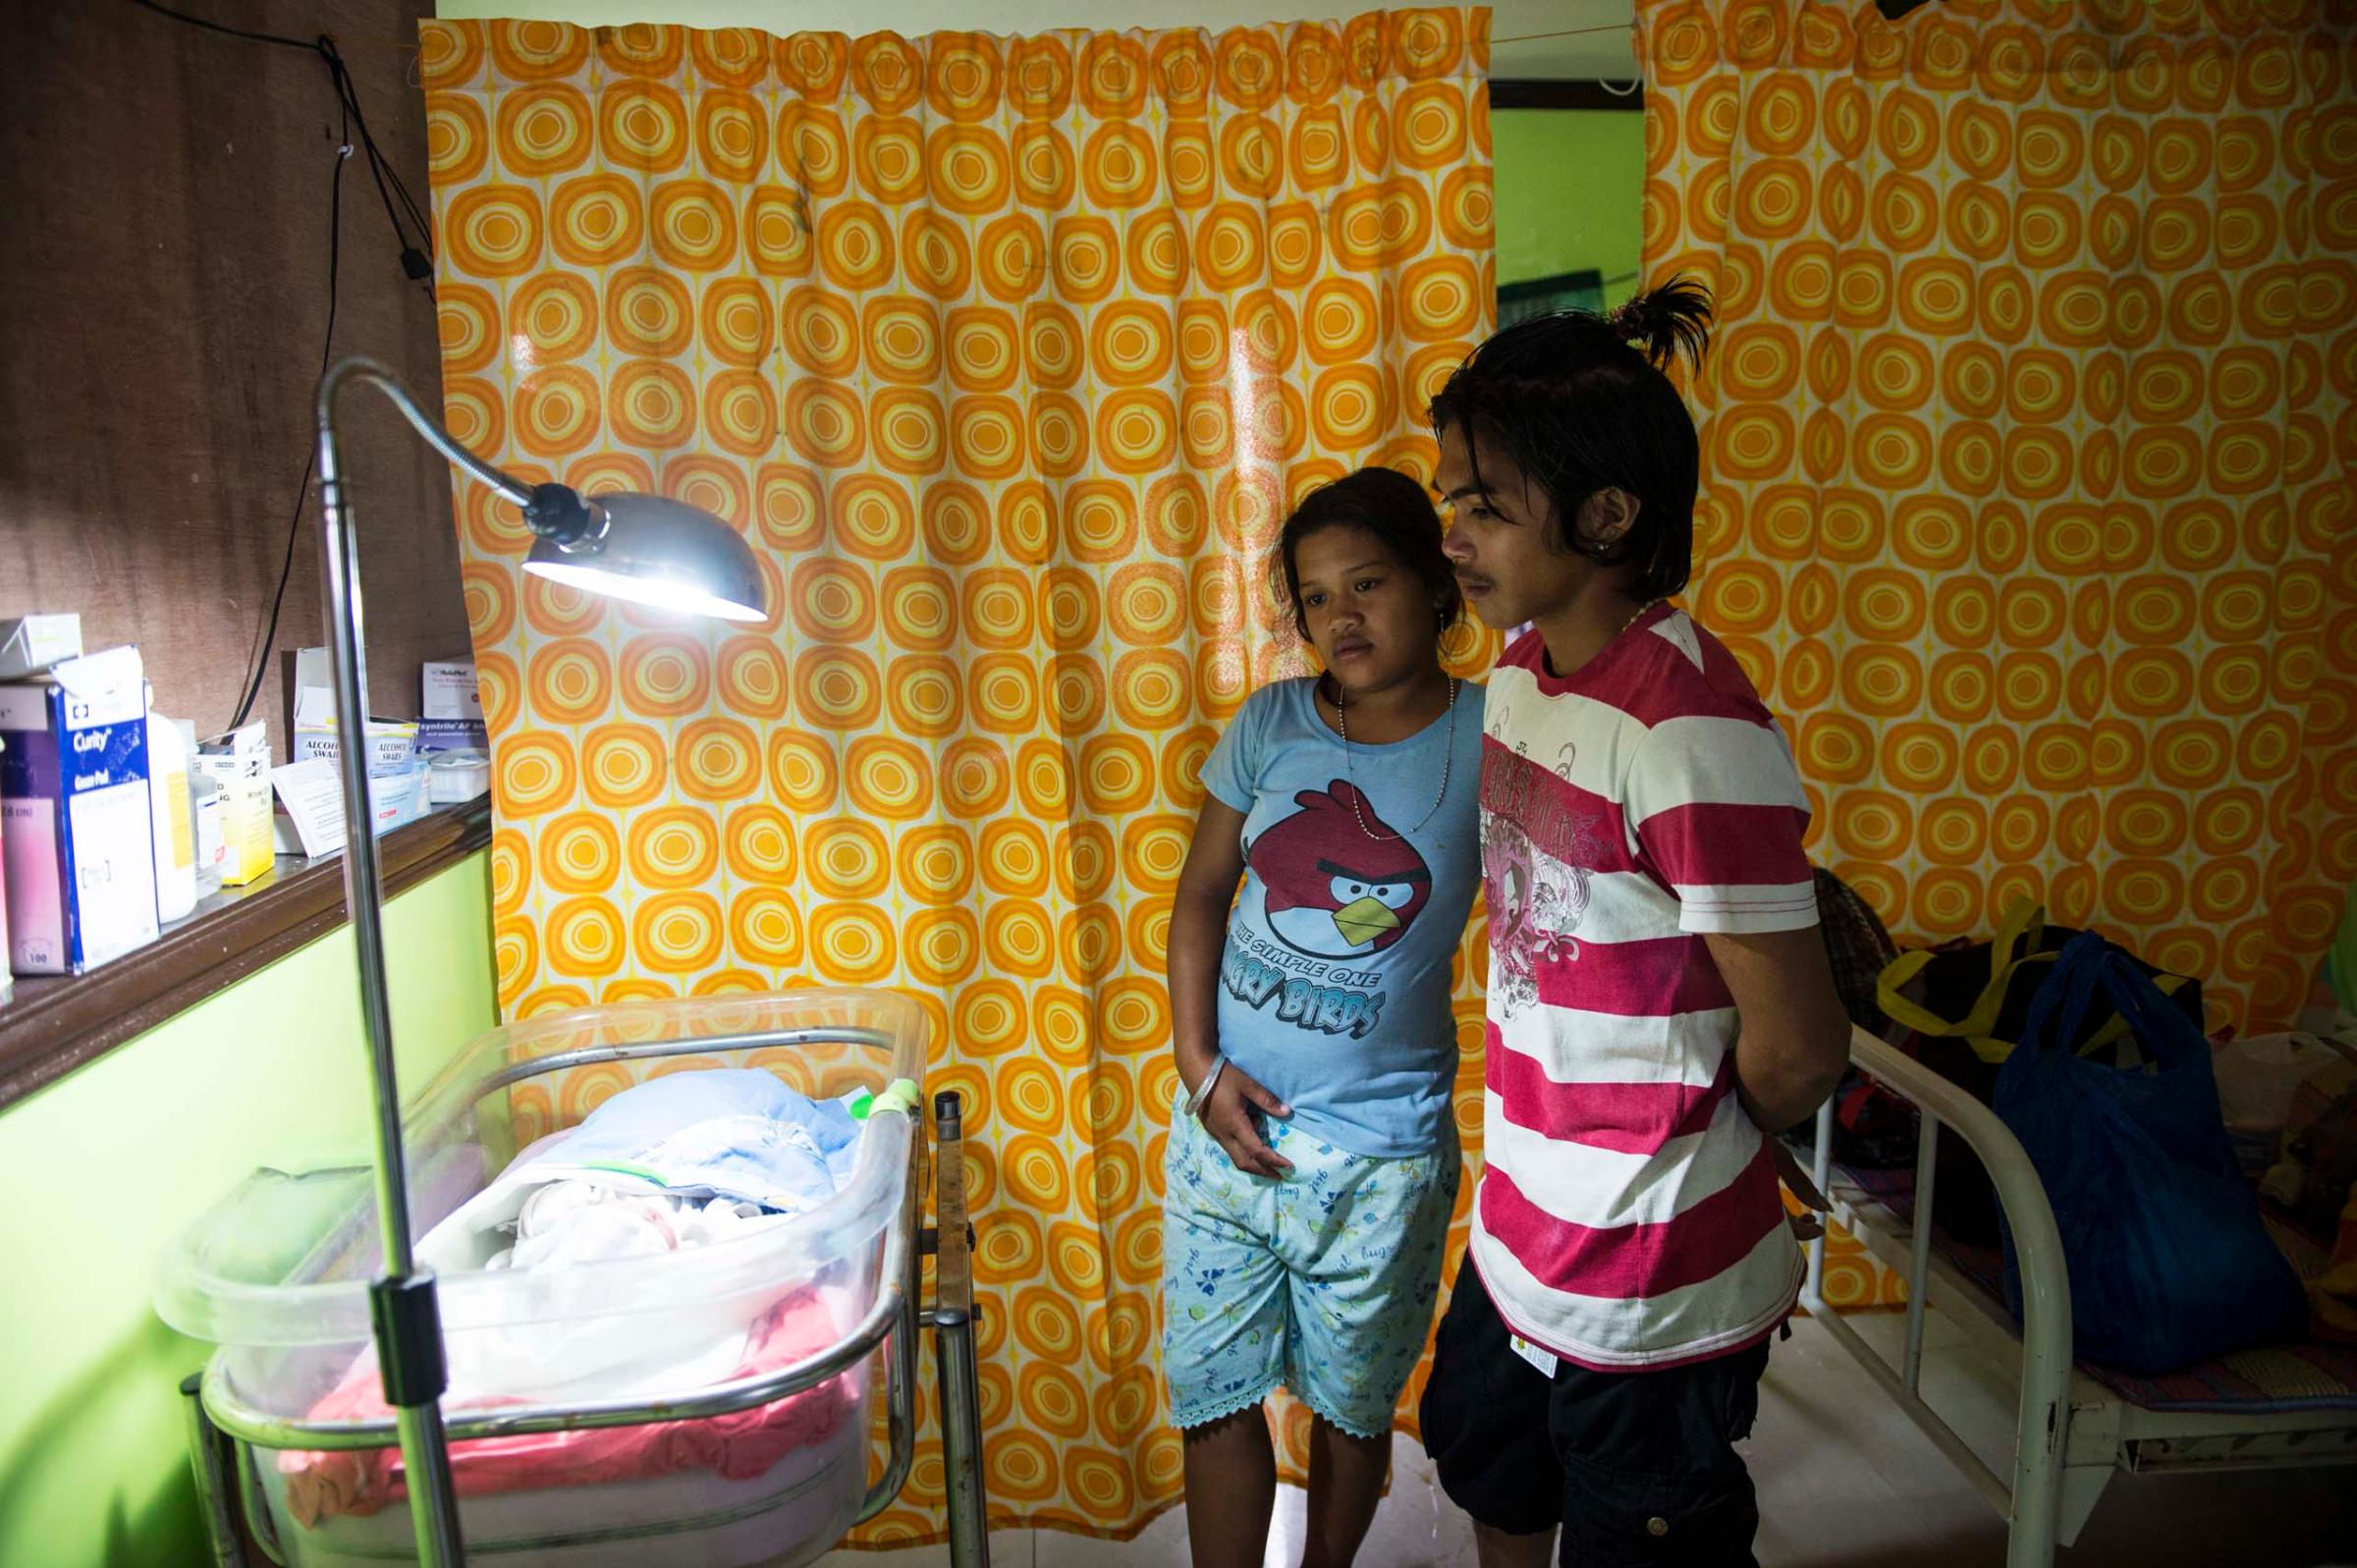 Jan.11, 2014: Analyn Pesado and Ryan Bacate watch over their new born son at the clinic in Tolosa, in the Philippines.